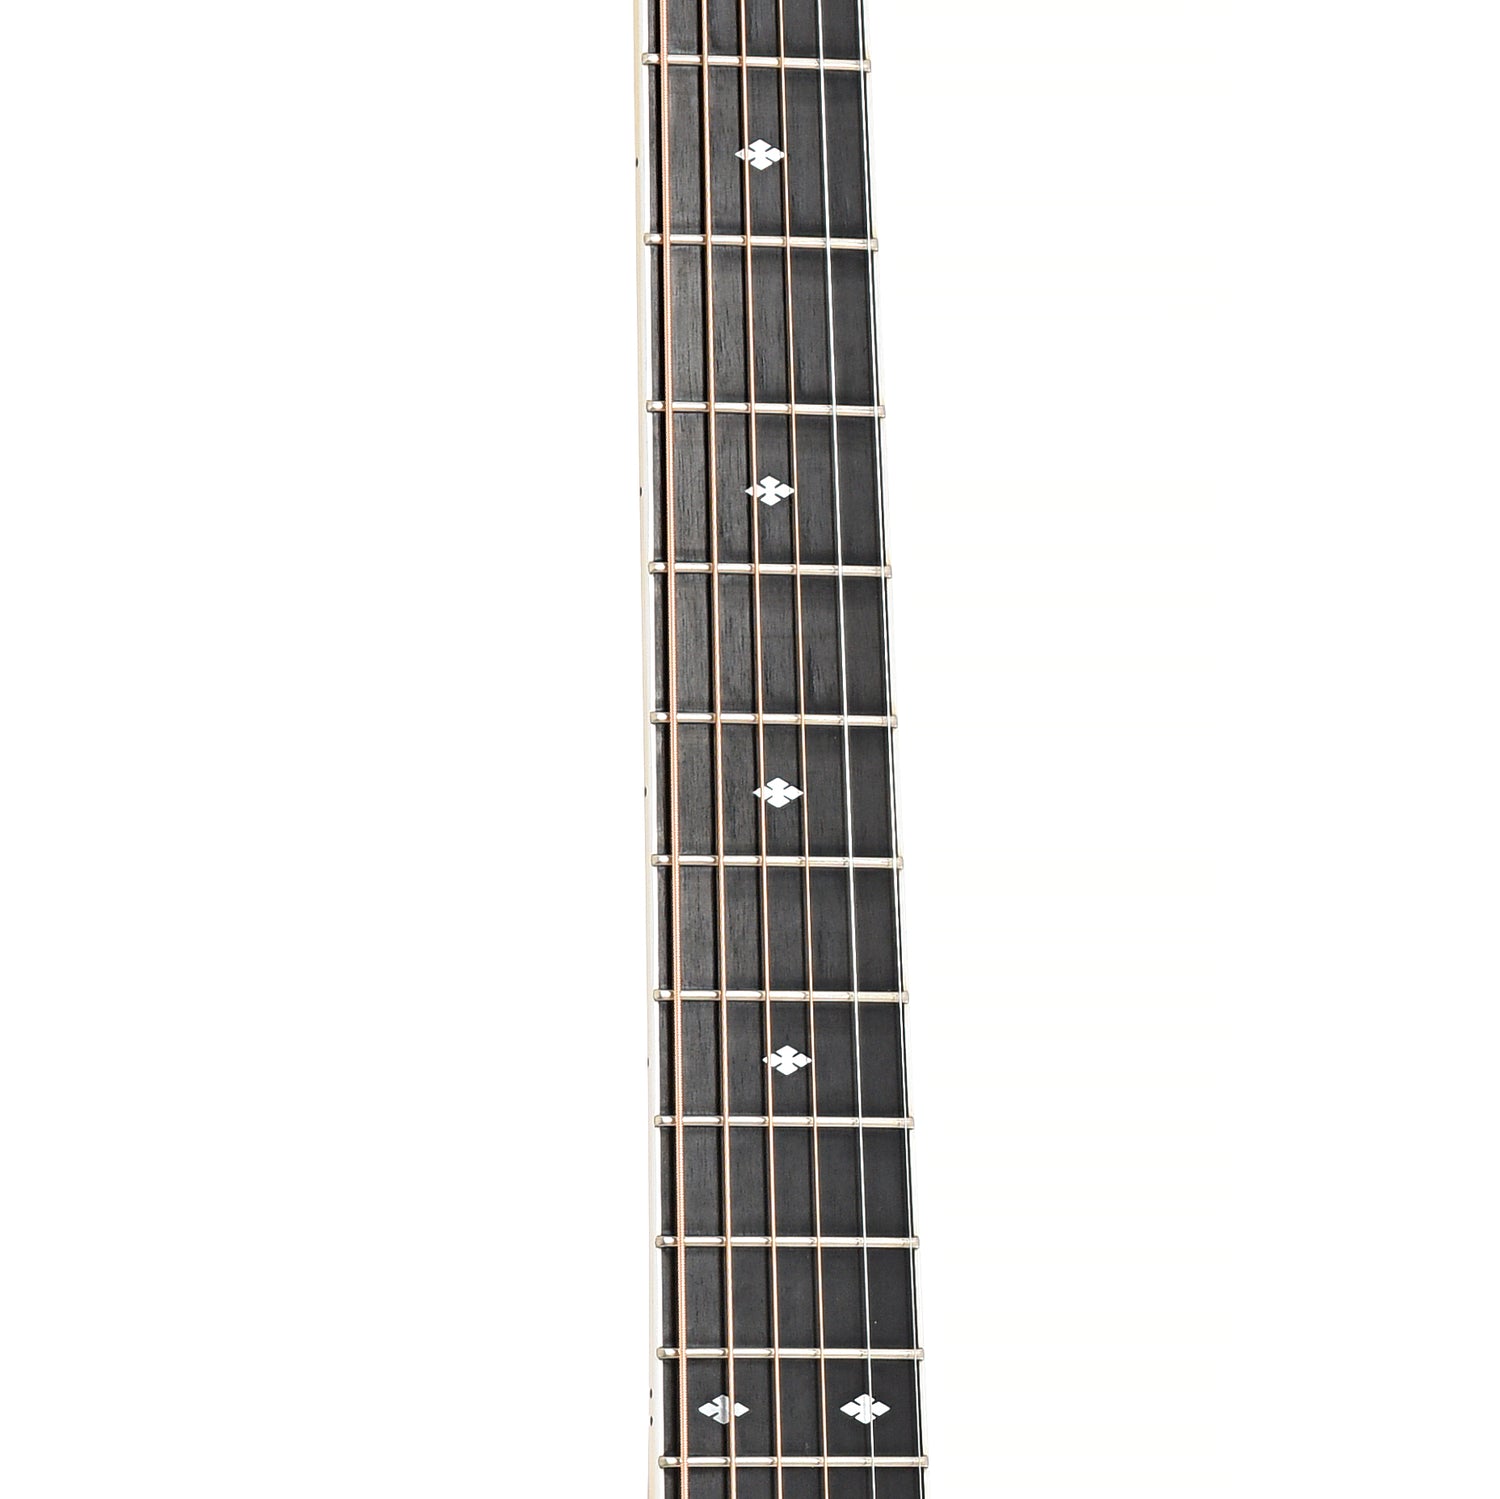 Fretboard of Taylor 812 Acoustic